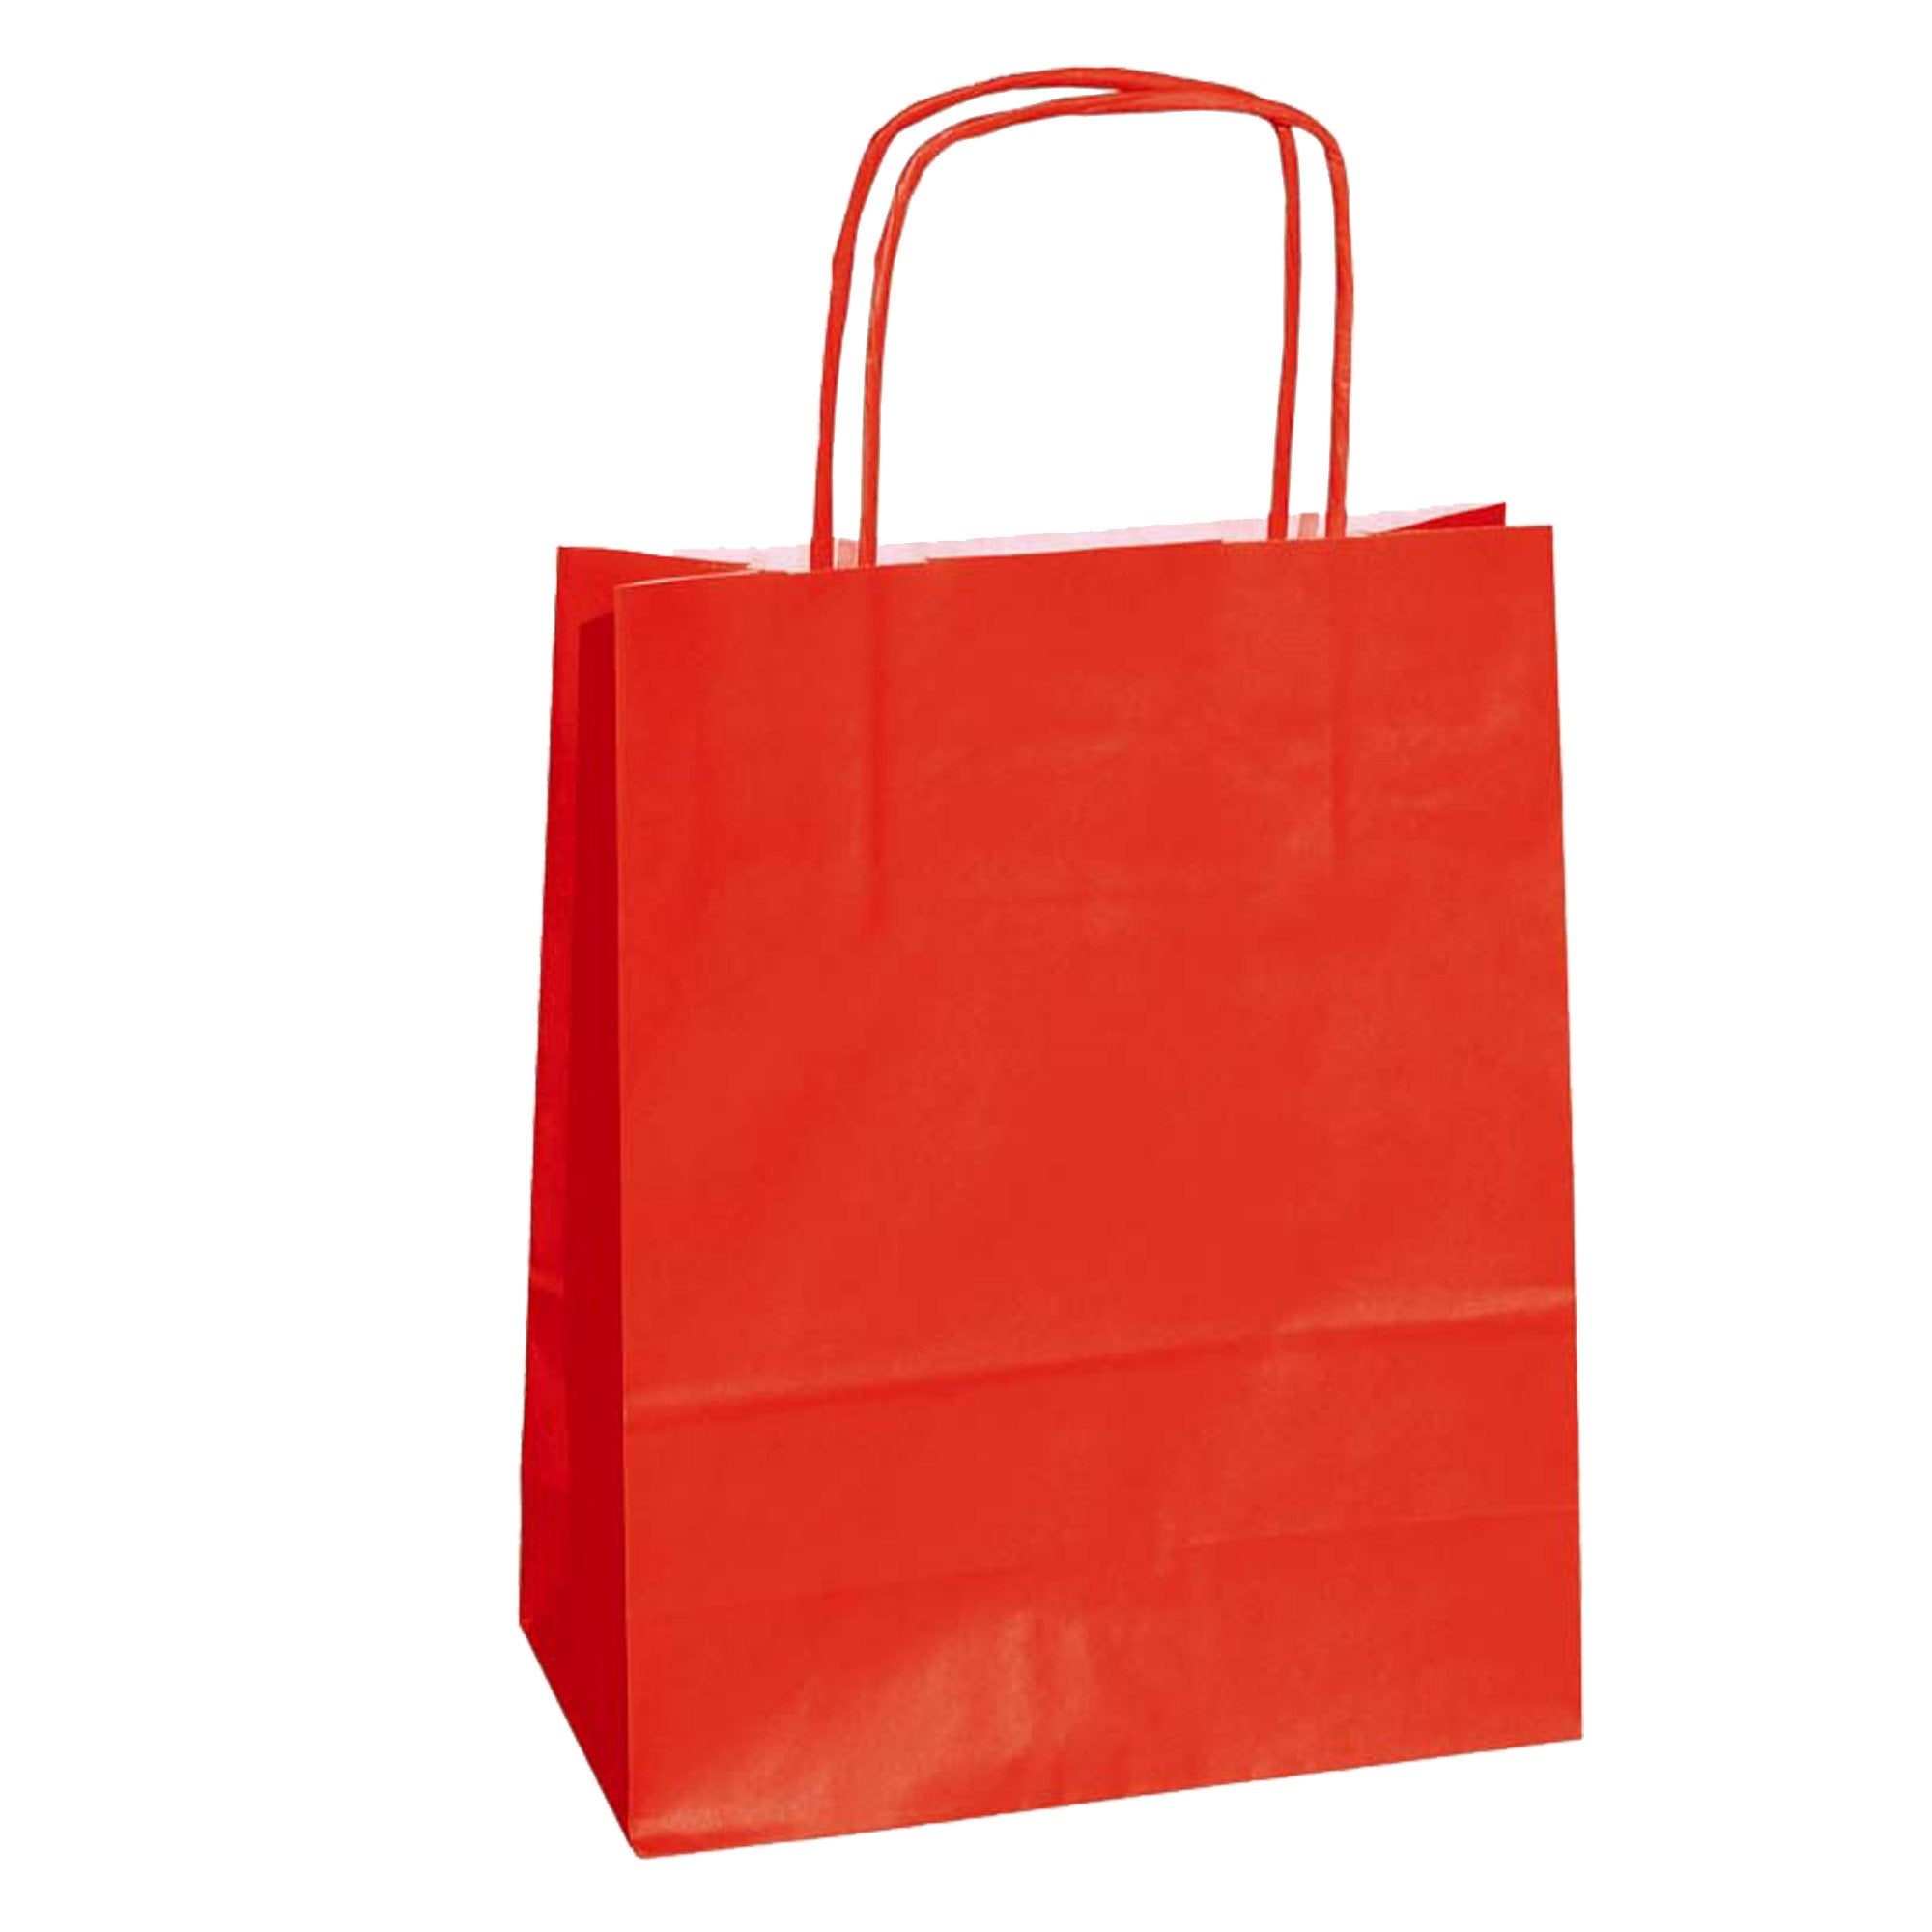 mainetti-bags-25-shoppers-carta-kraft-18x8x24cm-twisted-rosso